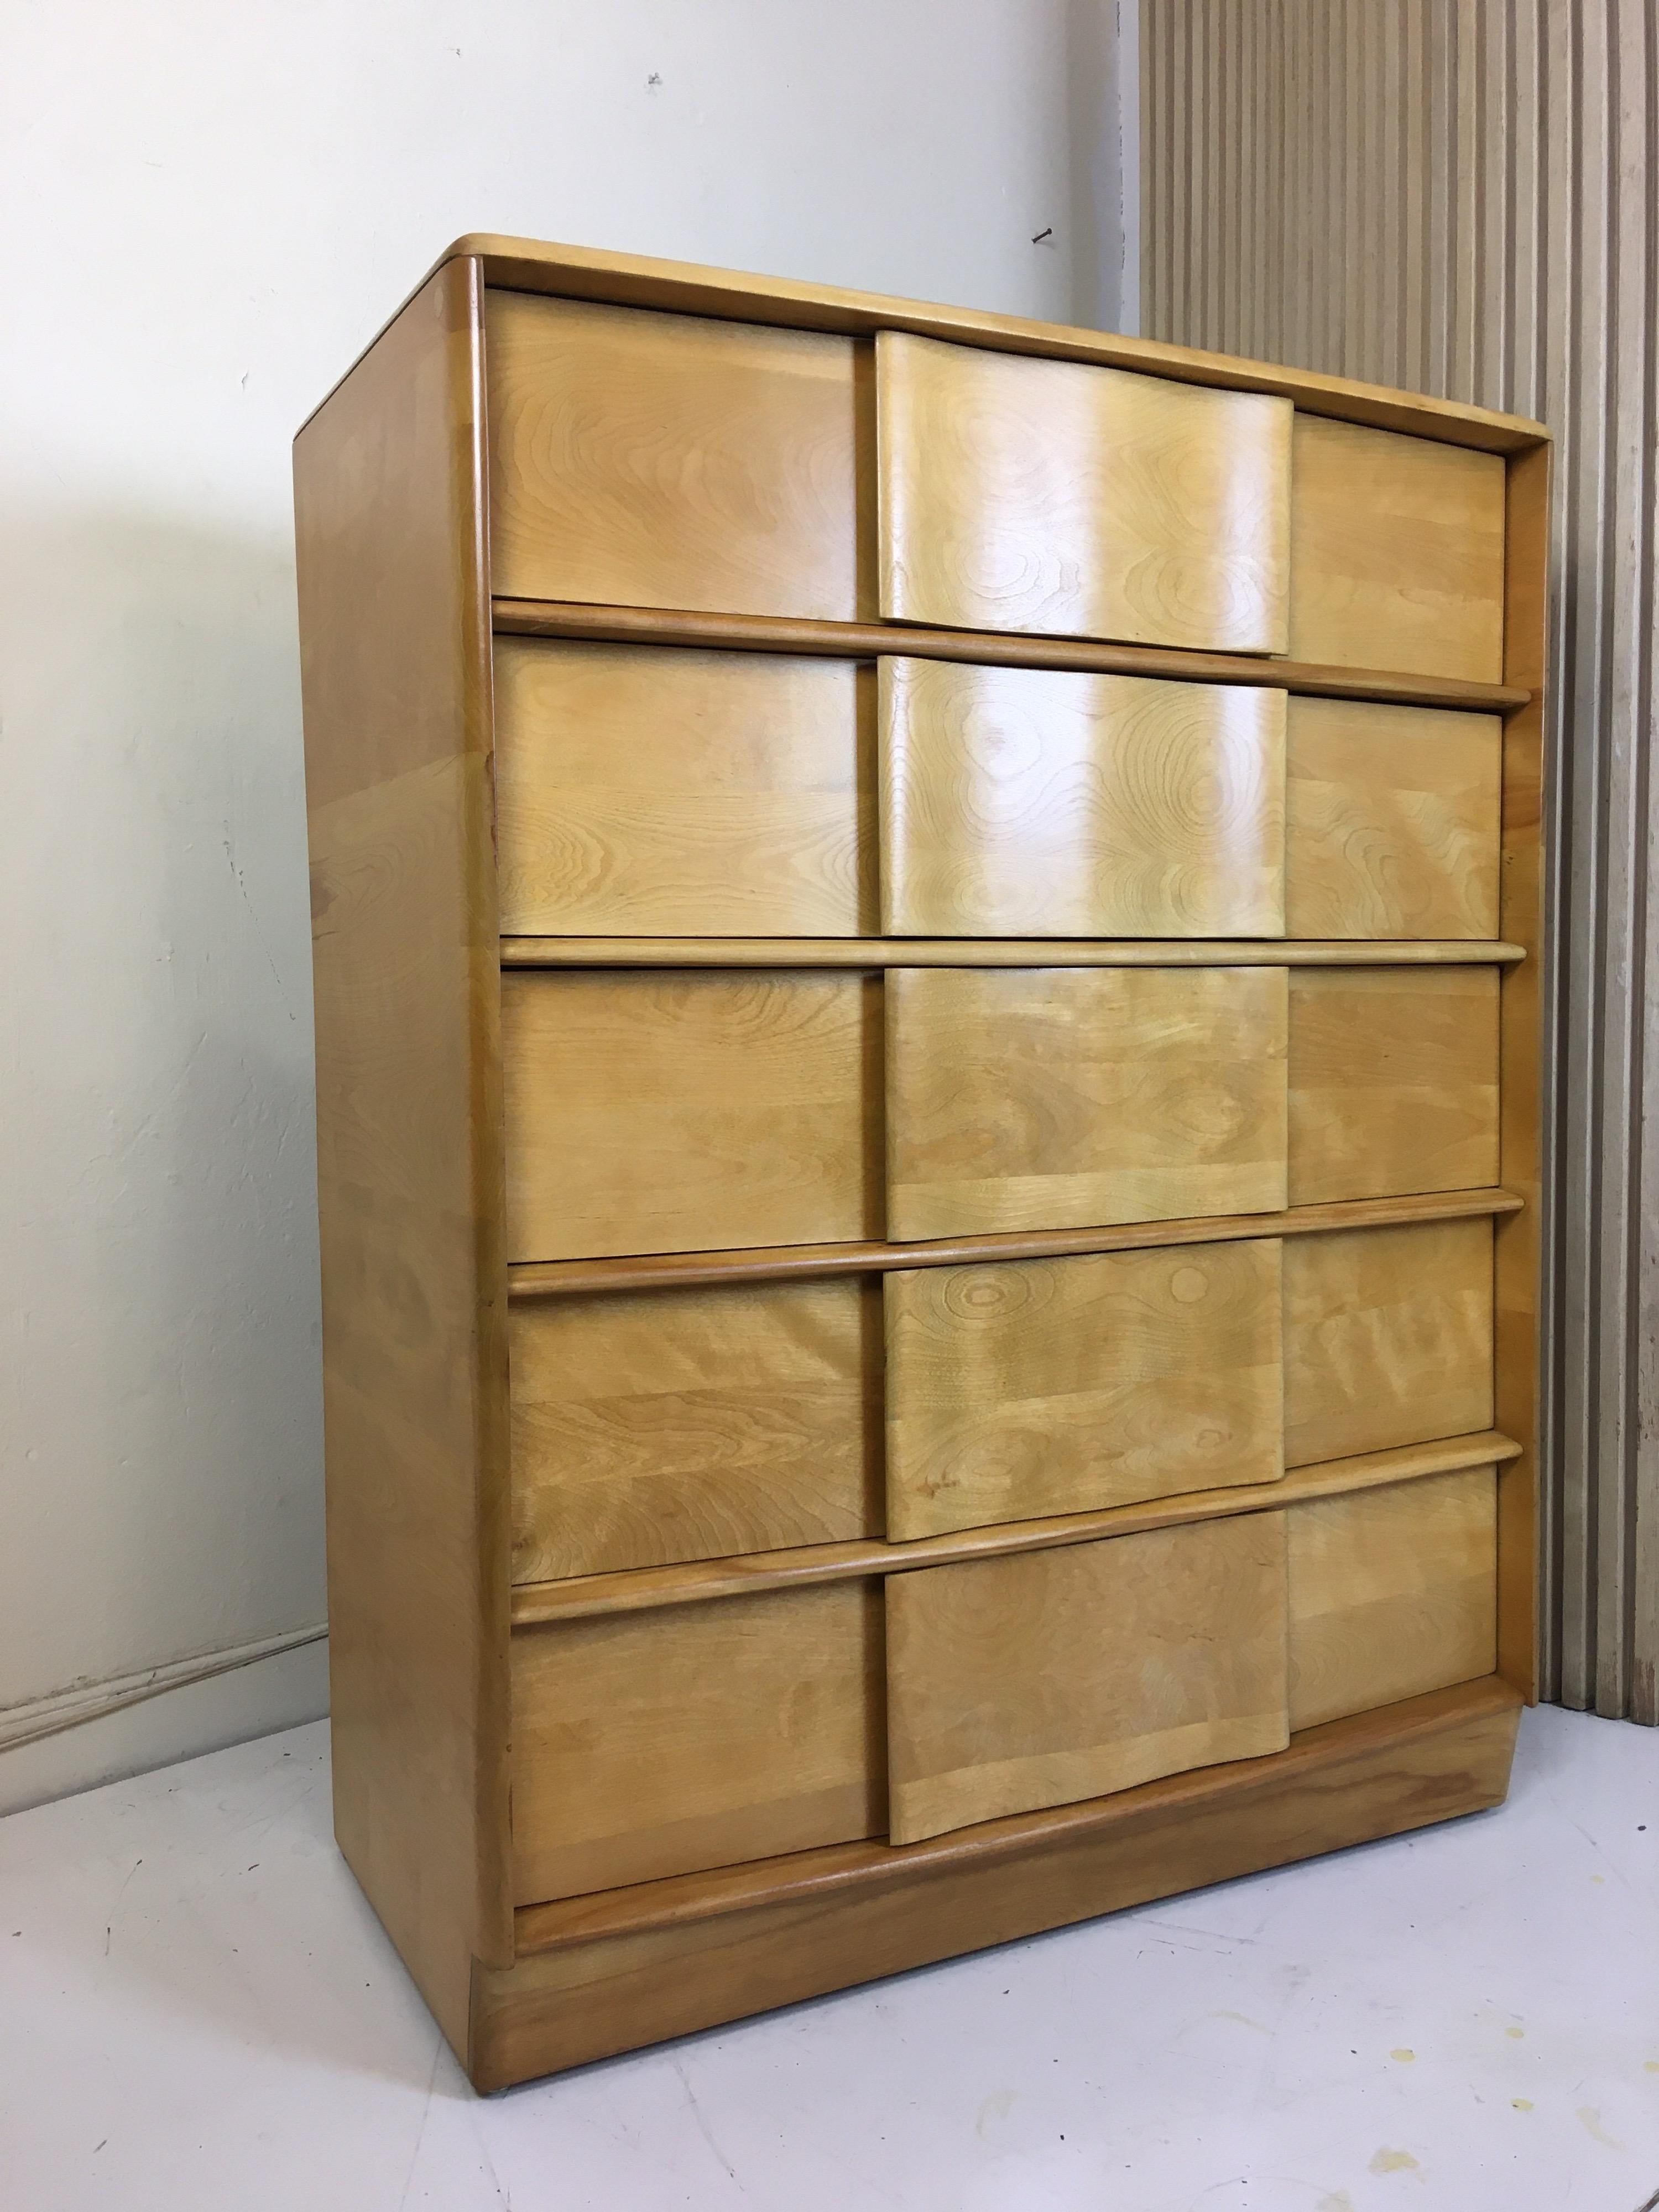 Heywood Wakefield 5-drawer dresser. Solid maple construction! No veneer! One of the few companies that produced their furniture from solid Wood. Sculptura Line from the mid-1950s with it's wavy front drawer design. This one is on wheels for ease of